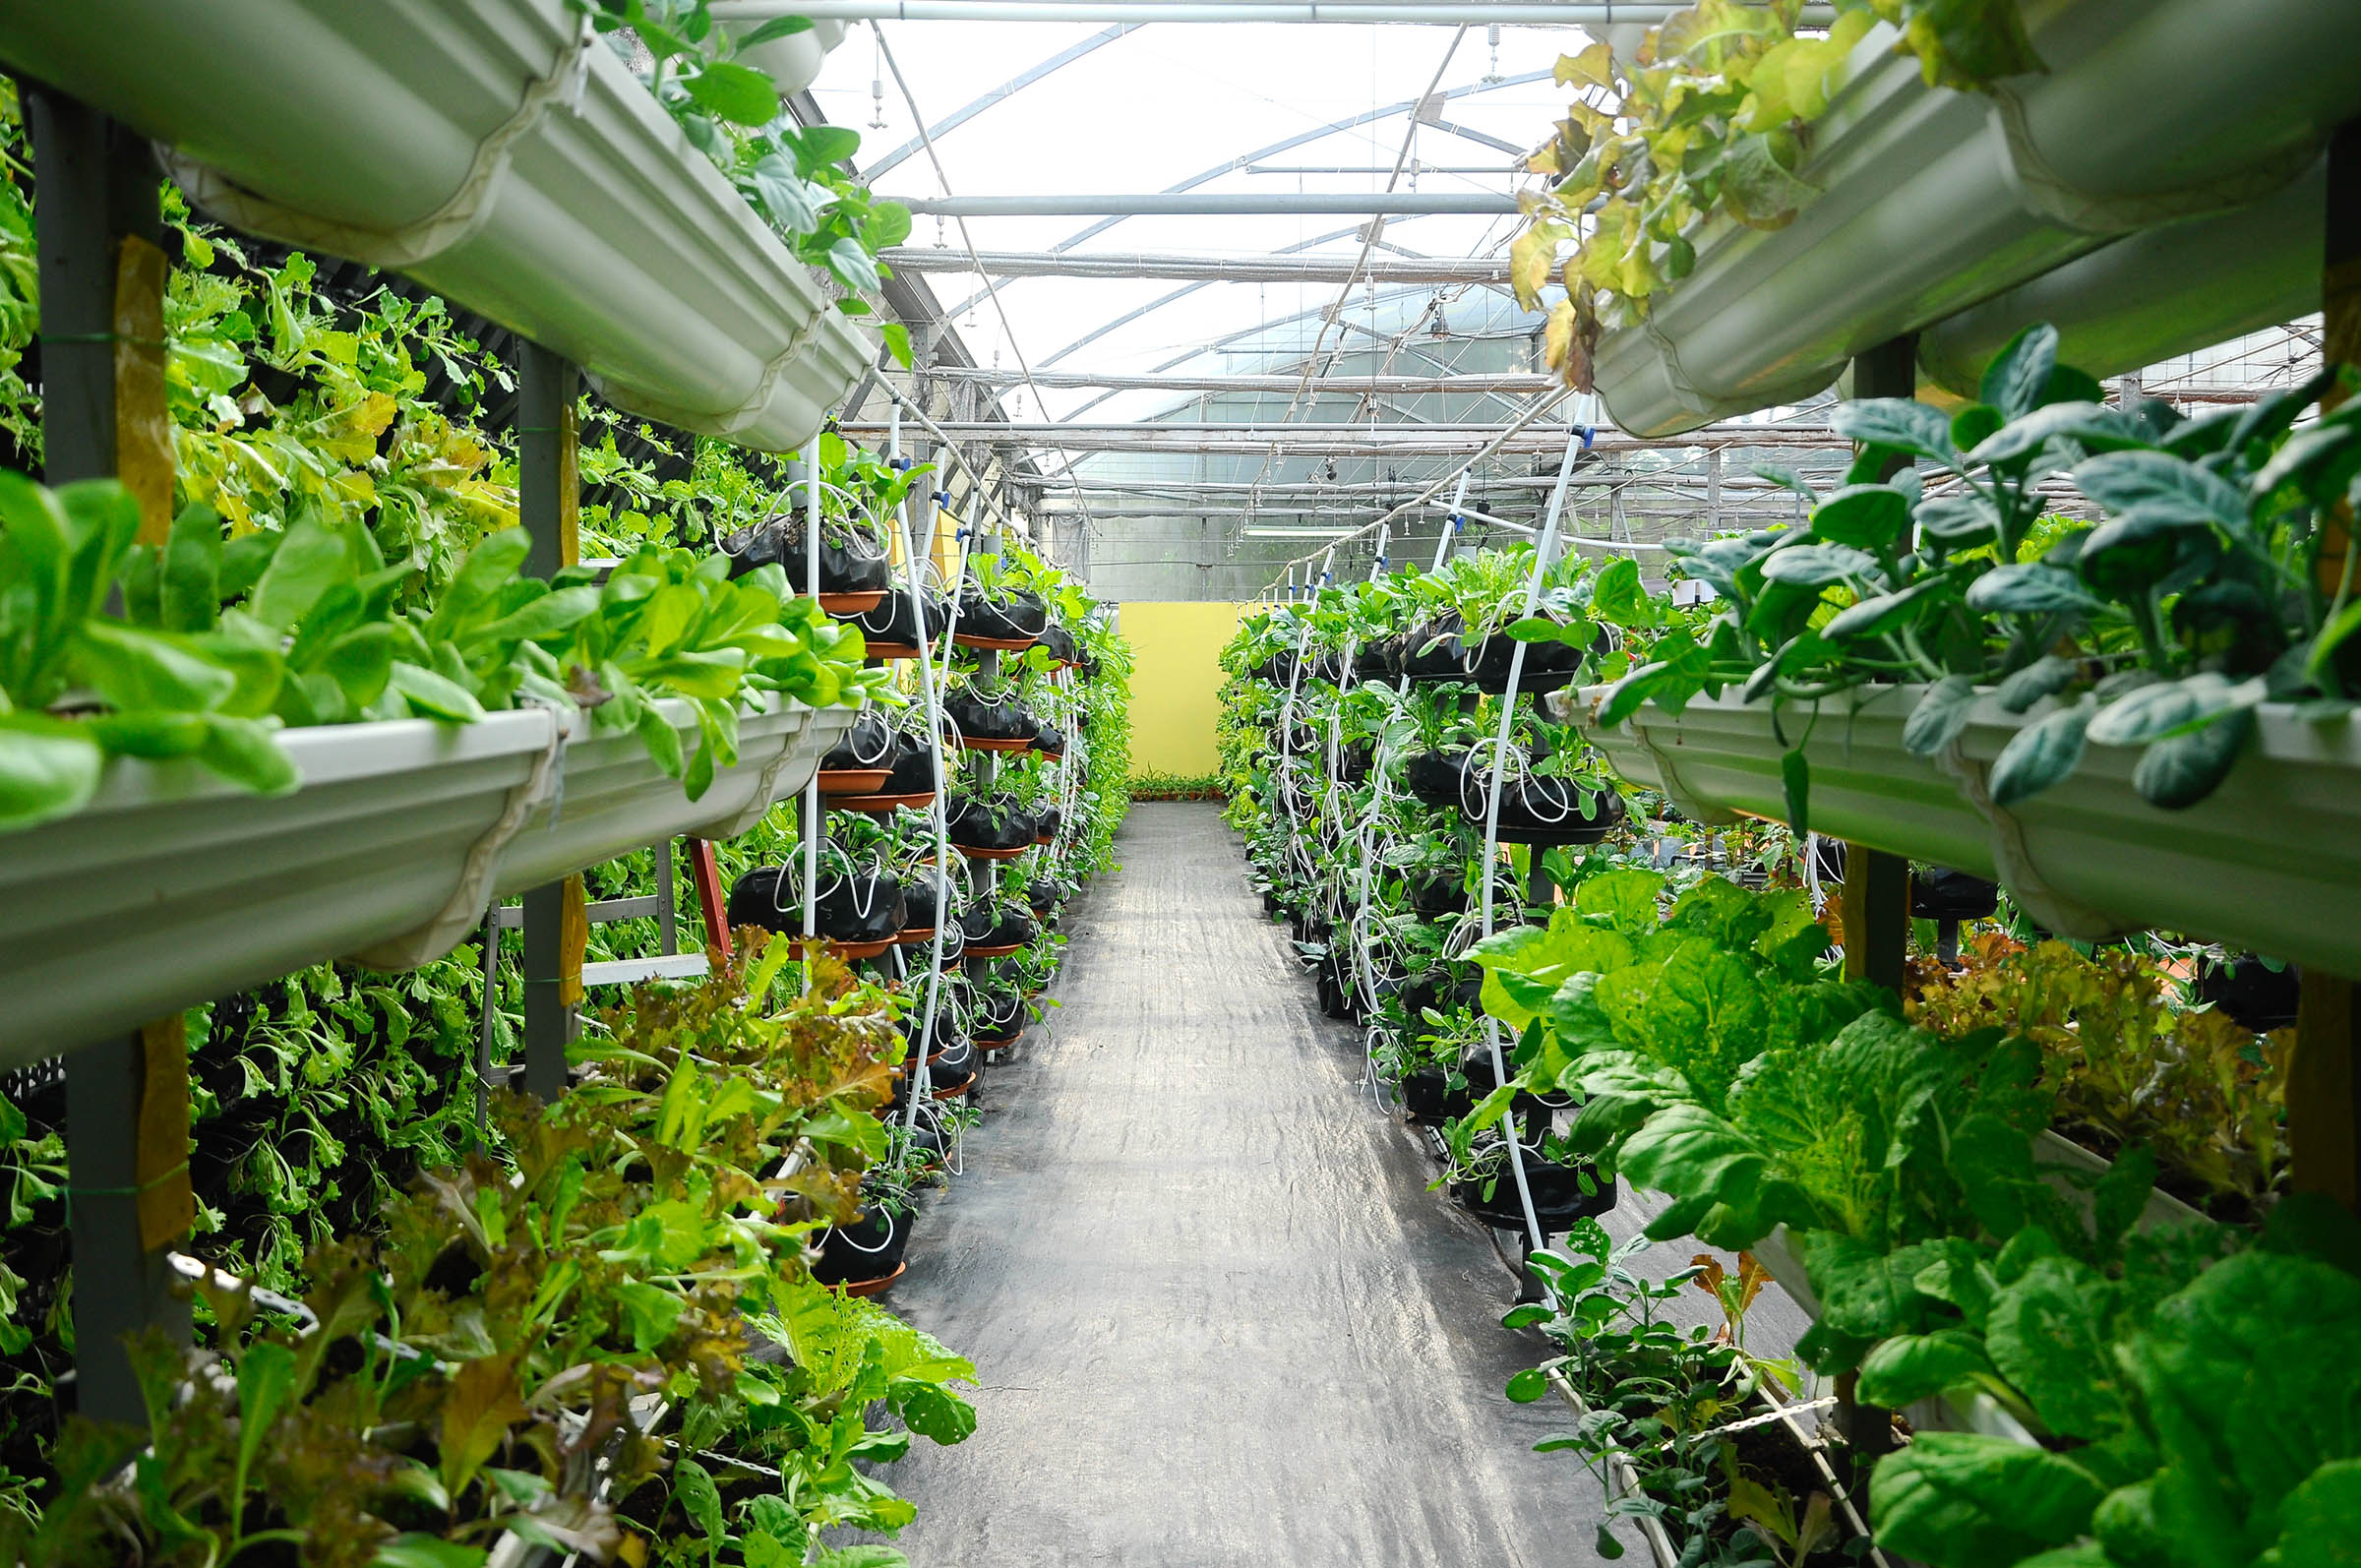 A greenhouse full of healthy plants